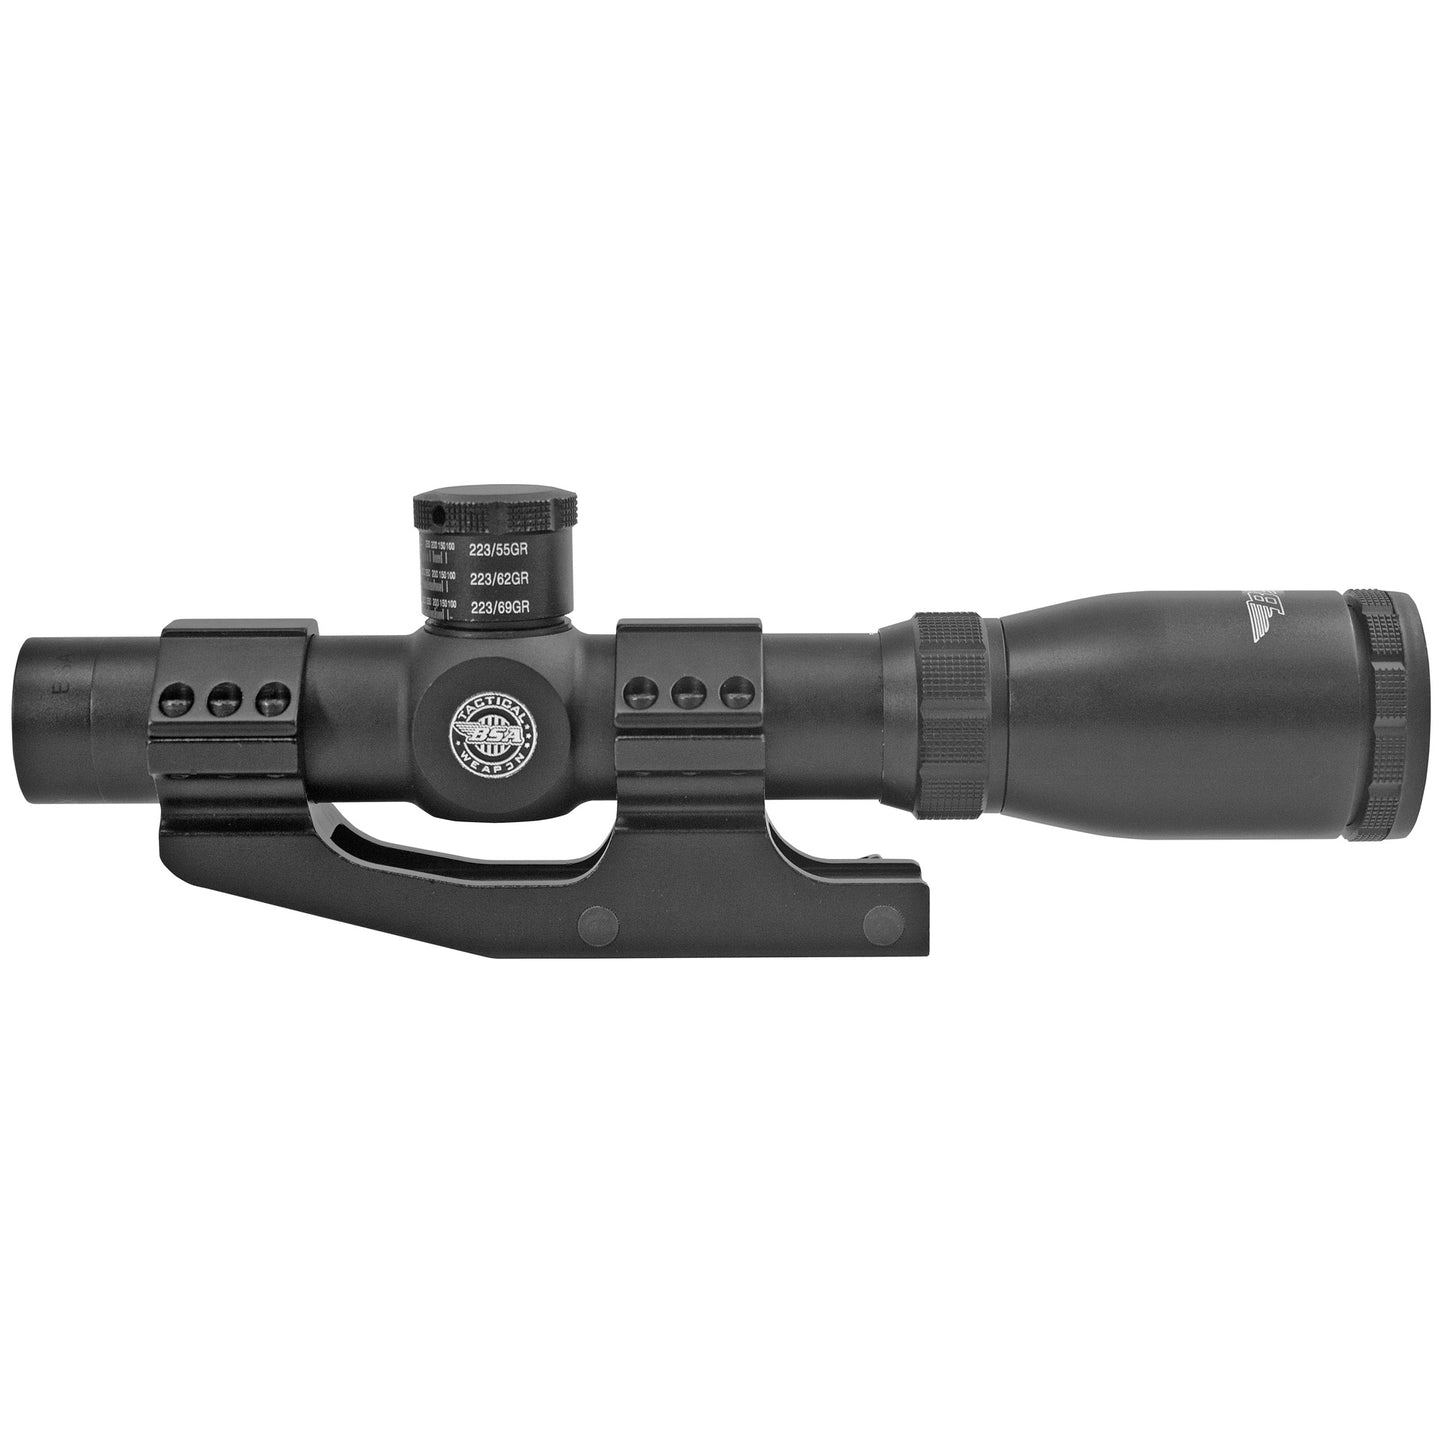 BSA Optics, Tactical Weapon, Rifle Scope, 1-4X24, 30mm Maintube, Mil Dot Reticle, 1/2 MOA Adjustments, Black Color, Mount, .223 and .308 Turrets